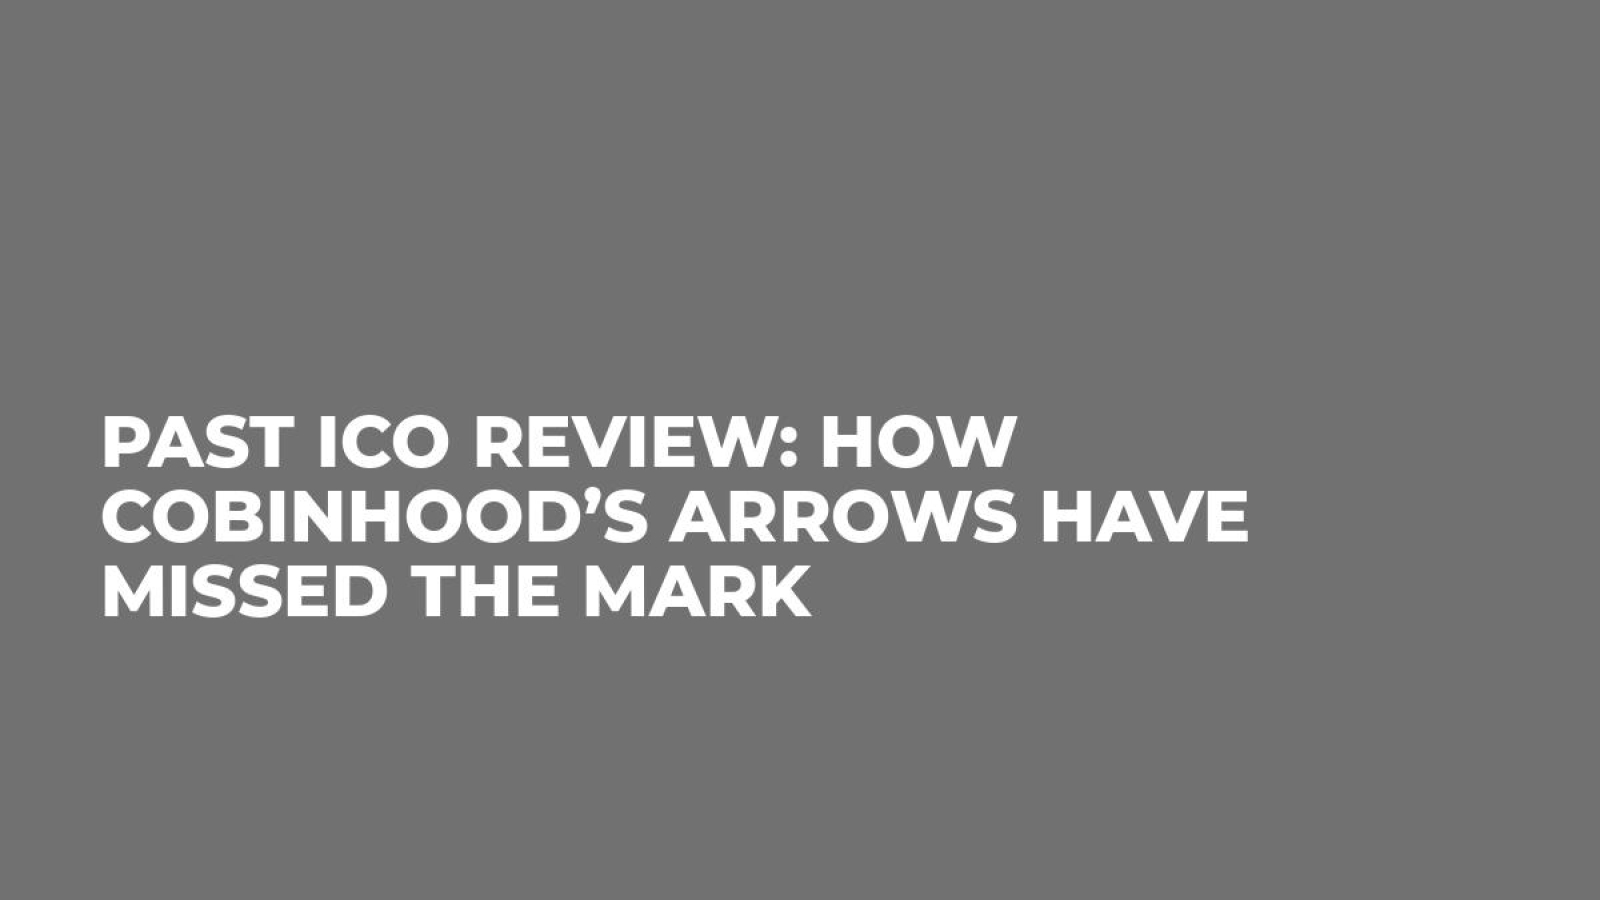 Past ICO Review: How Cobinhood’s Arrows Have Missed the Mark 